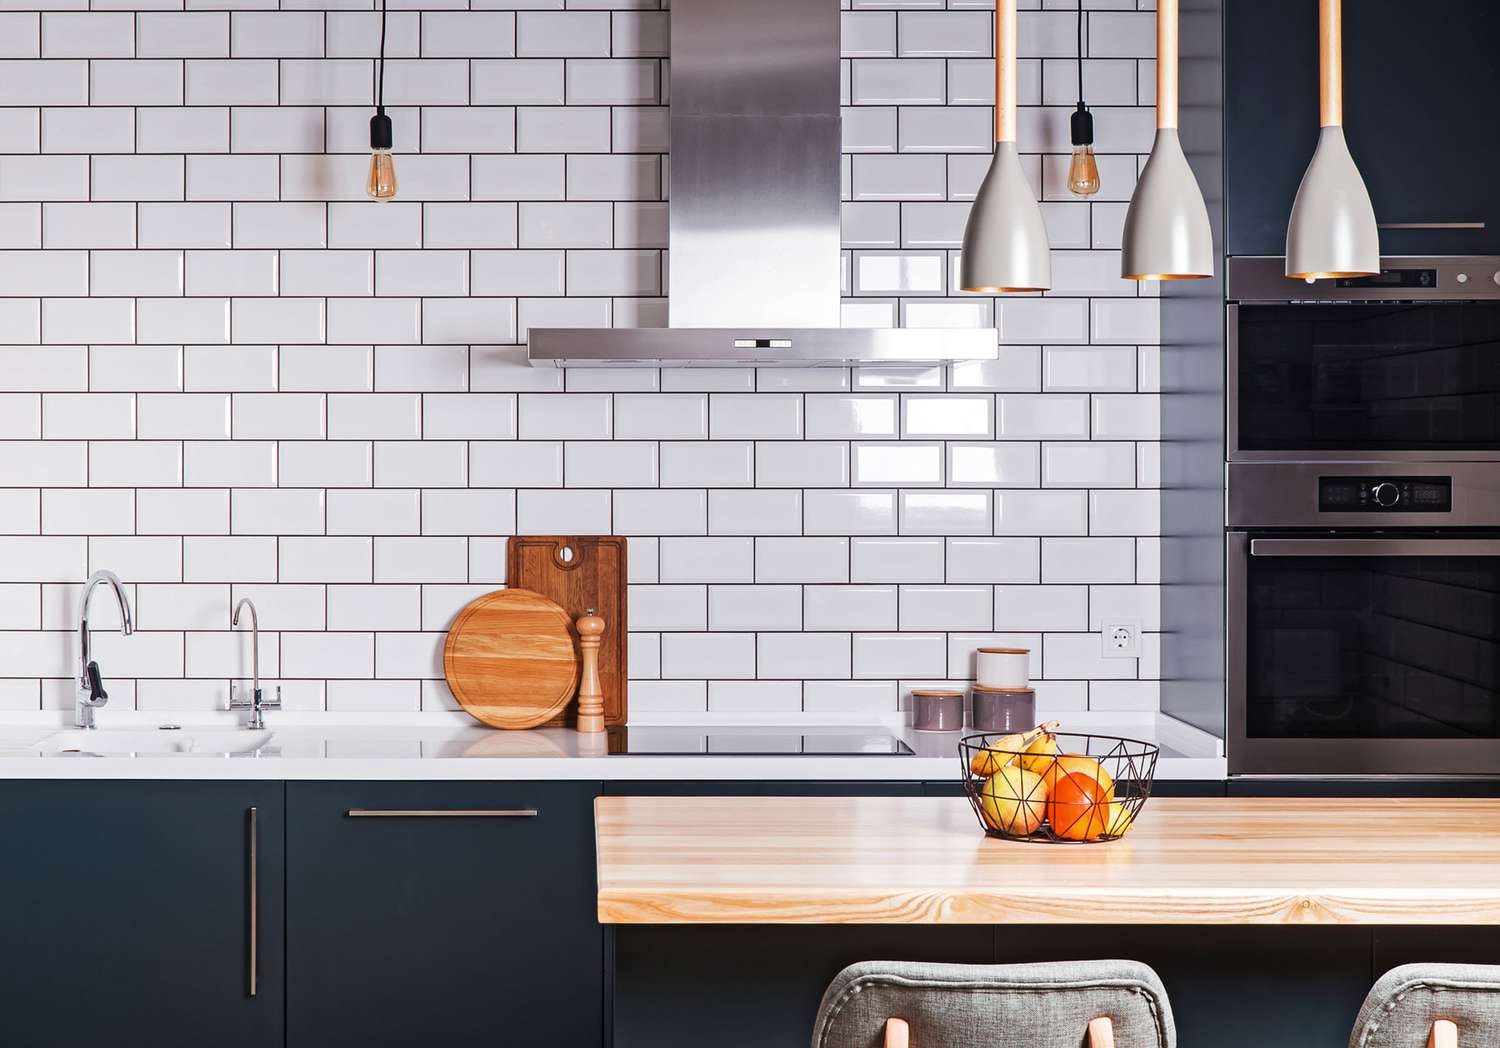 Tiles for Kitchen Back Splash: A Solution for Natural and Clean Kitchen